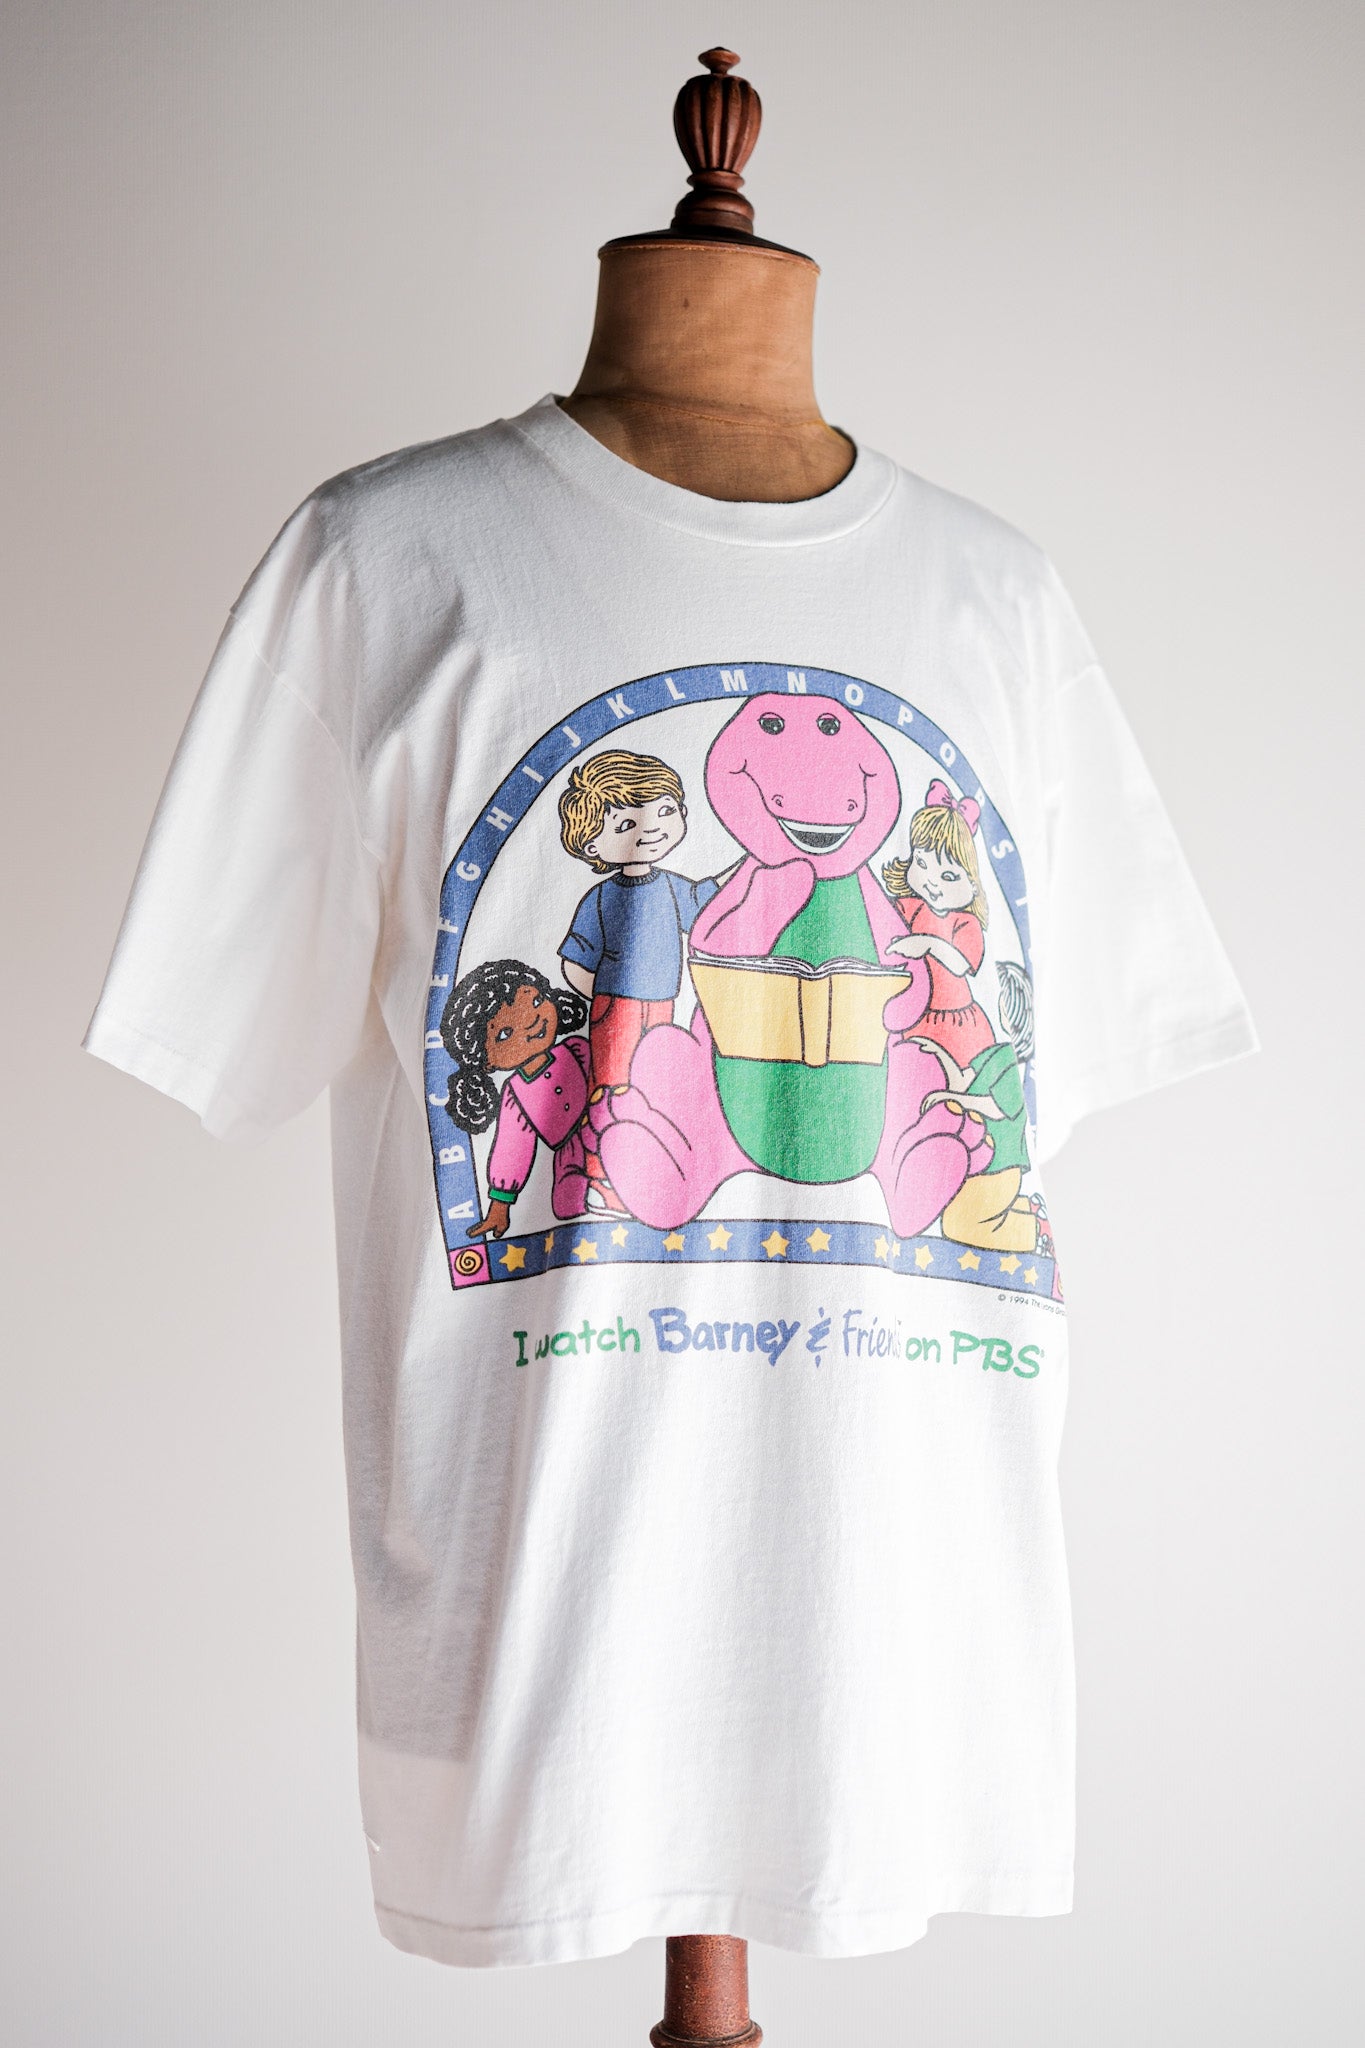 【~90's】Vintage TV Print T-shirt Size.XL "Barney & Friends" "Made in U.S.A."